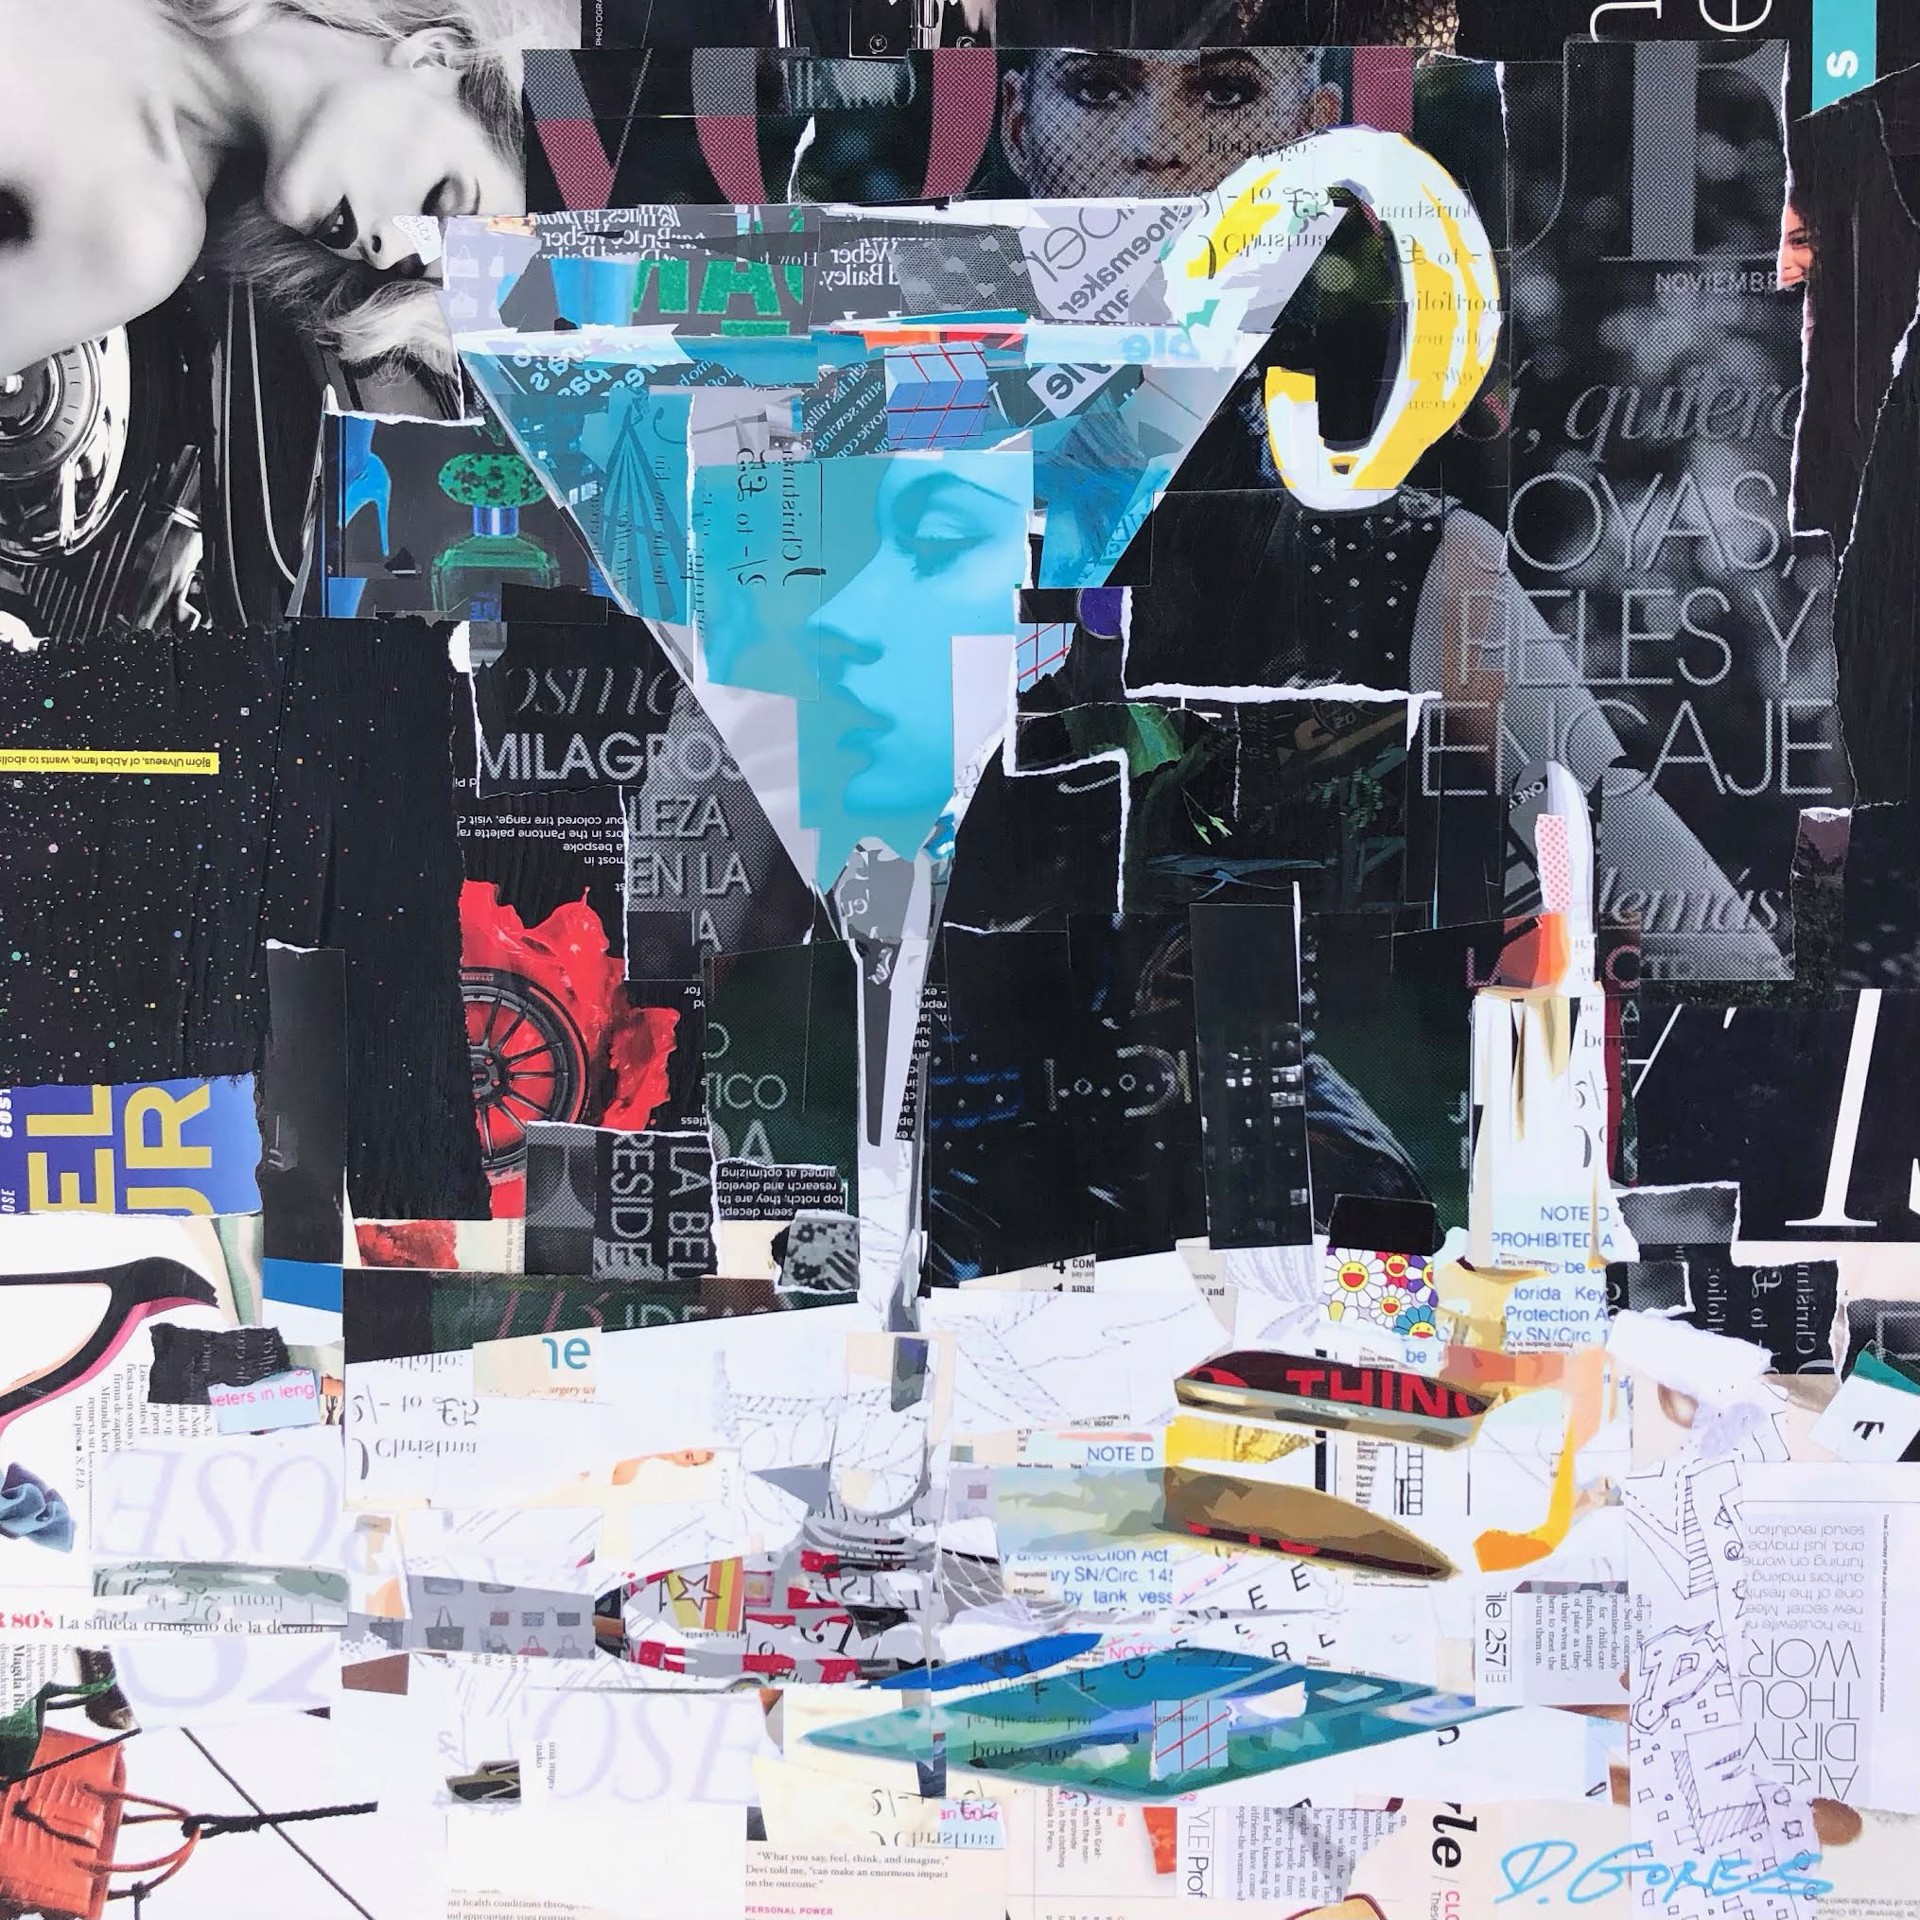 What You Say, Feel, Think and Imagine by Derek Gores